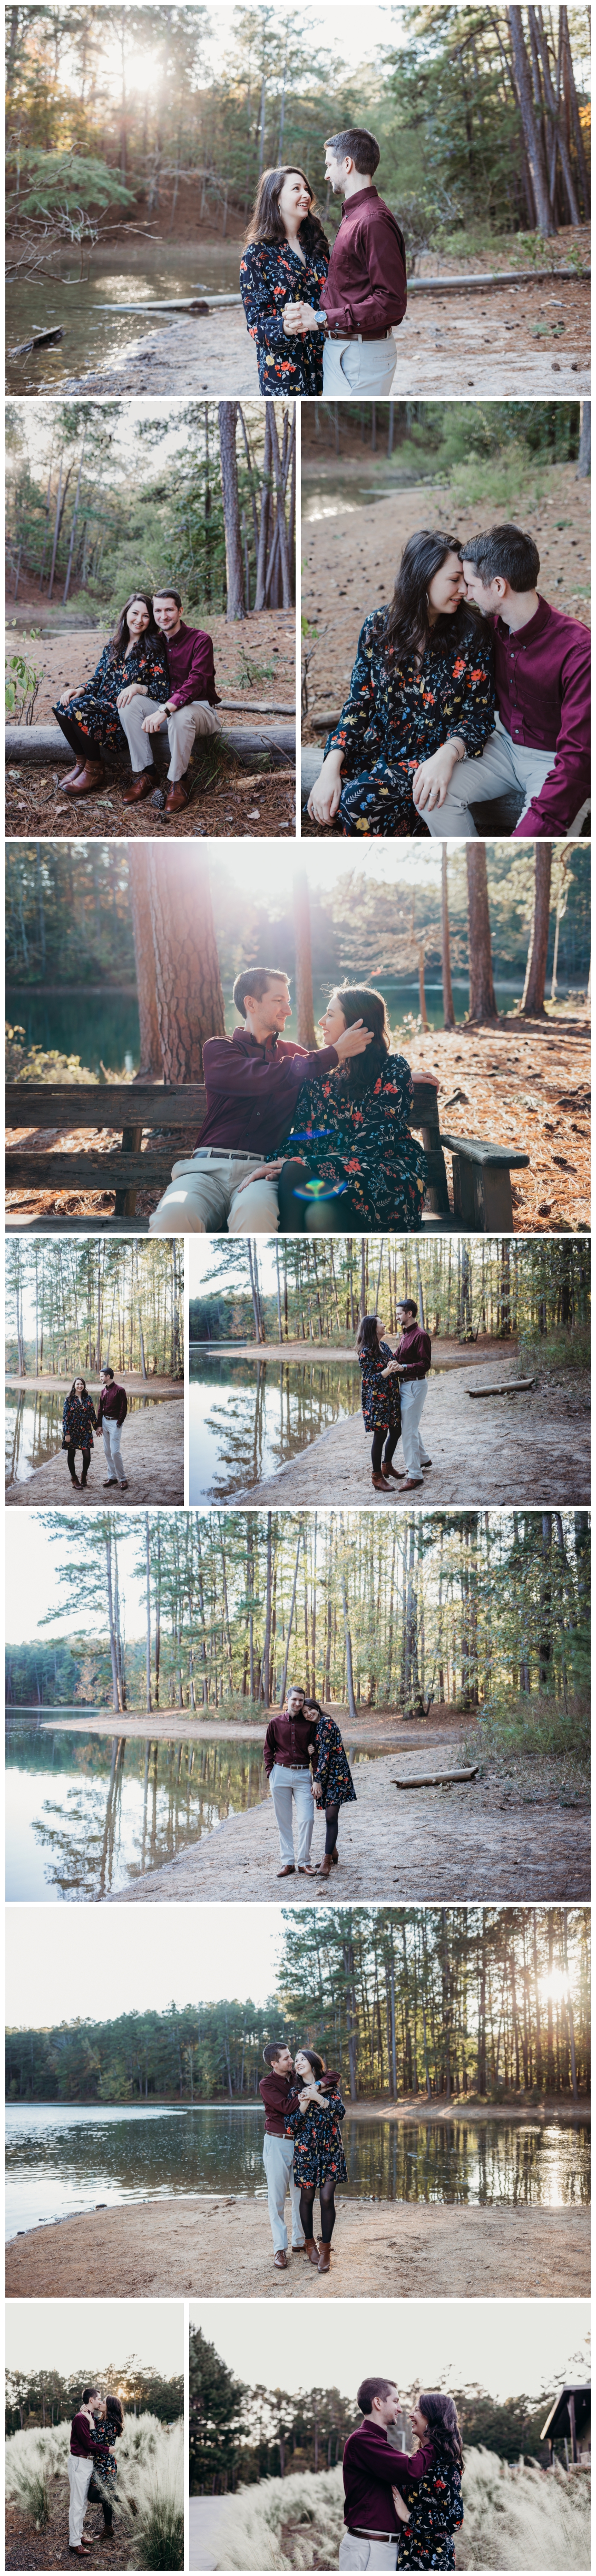 Lakeside engagement photos in the fall